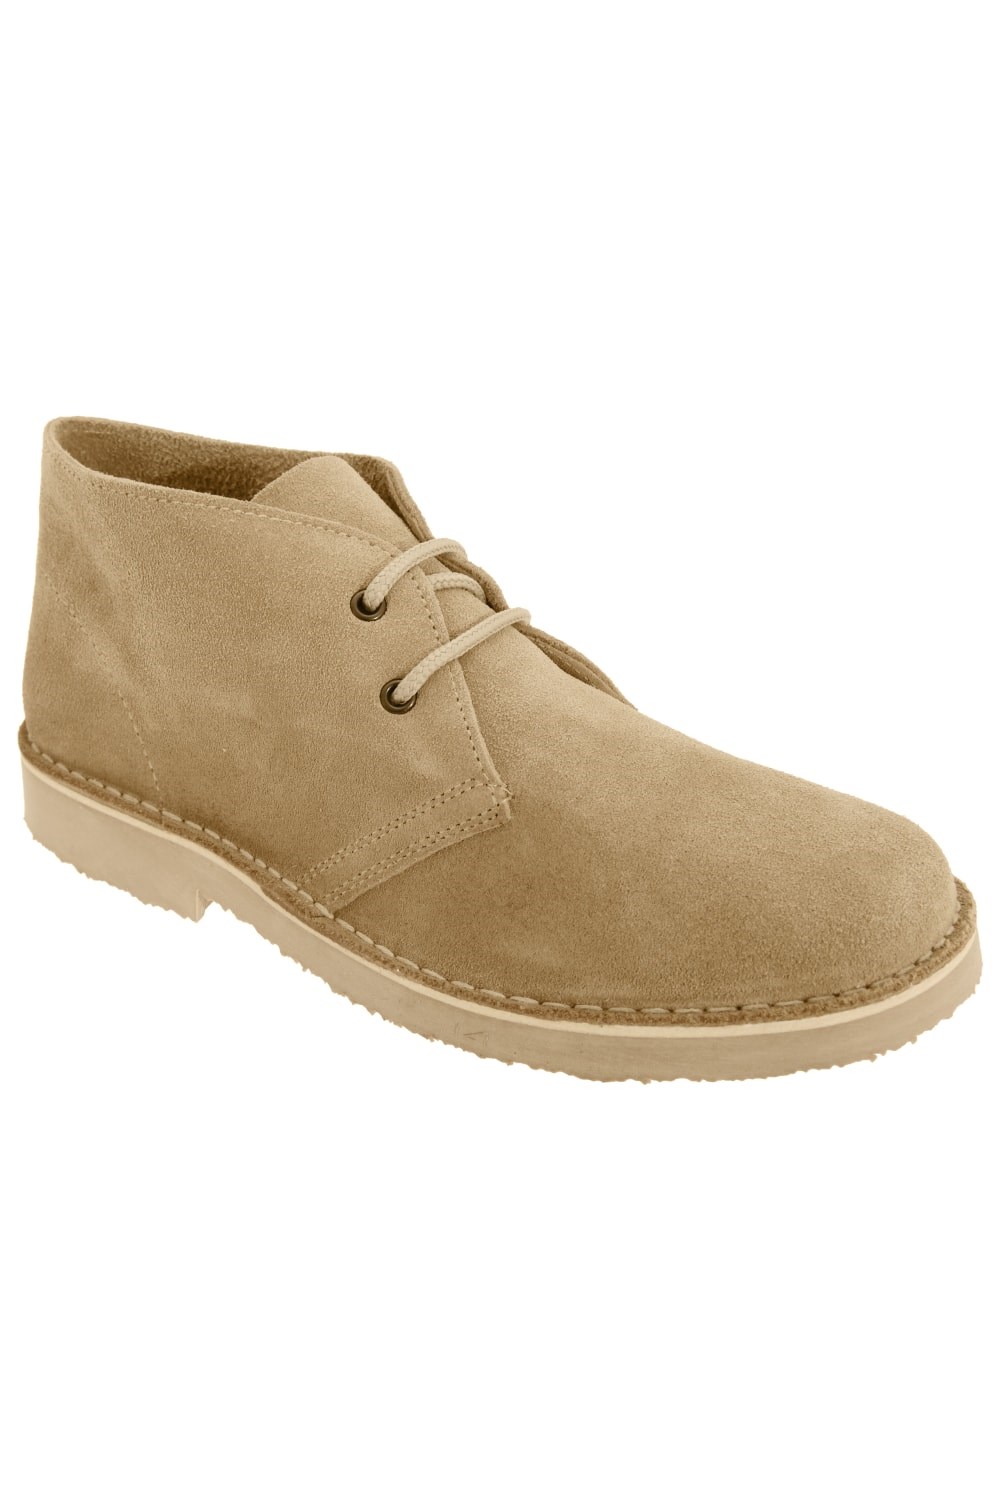 Mens Real Suede Desert Boots -